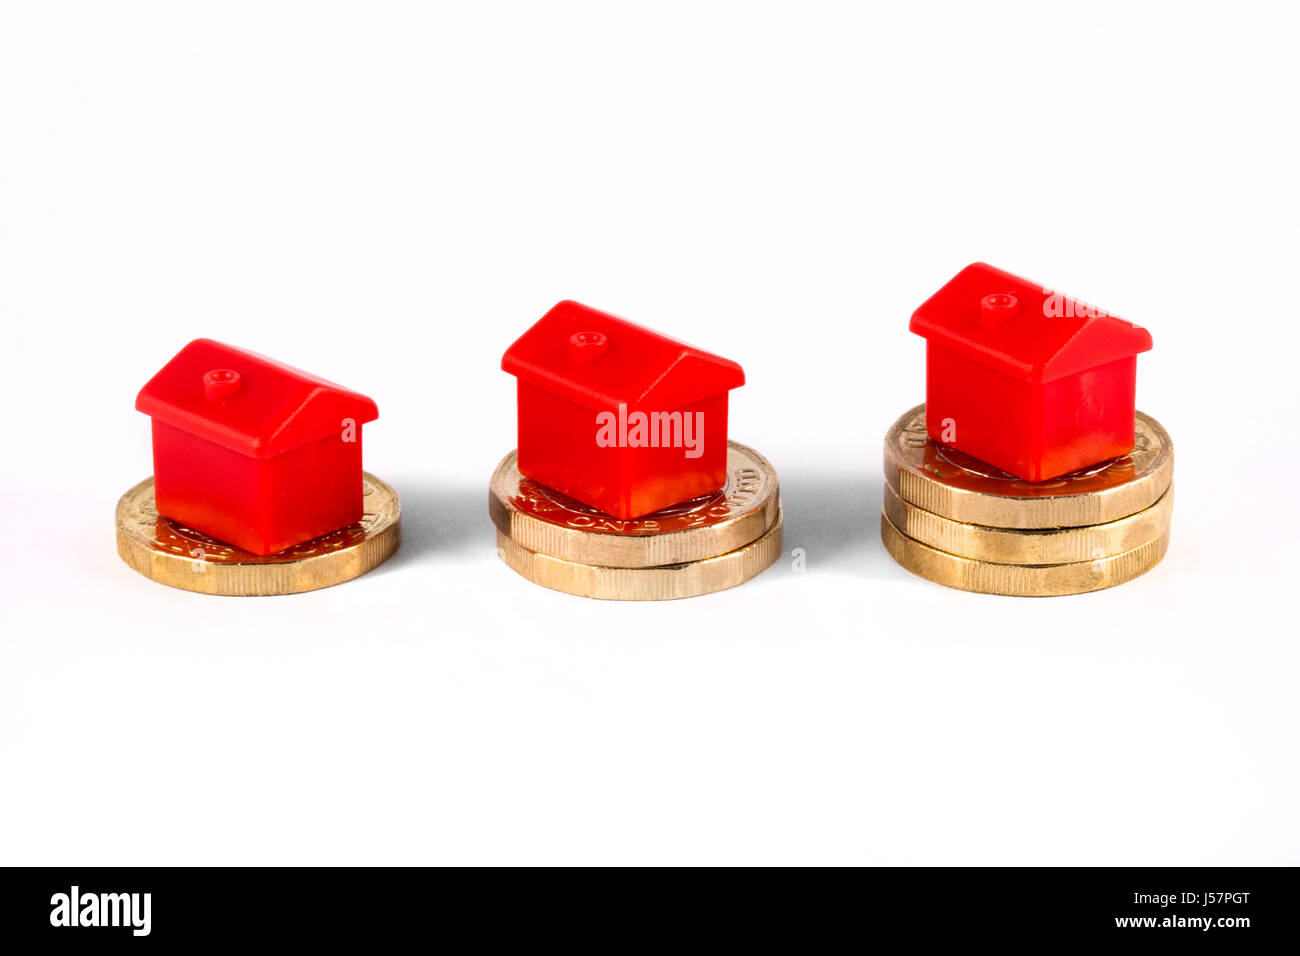 Red Houses sitting on top of stacks of coins, over a white background. Stock Photo